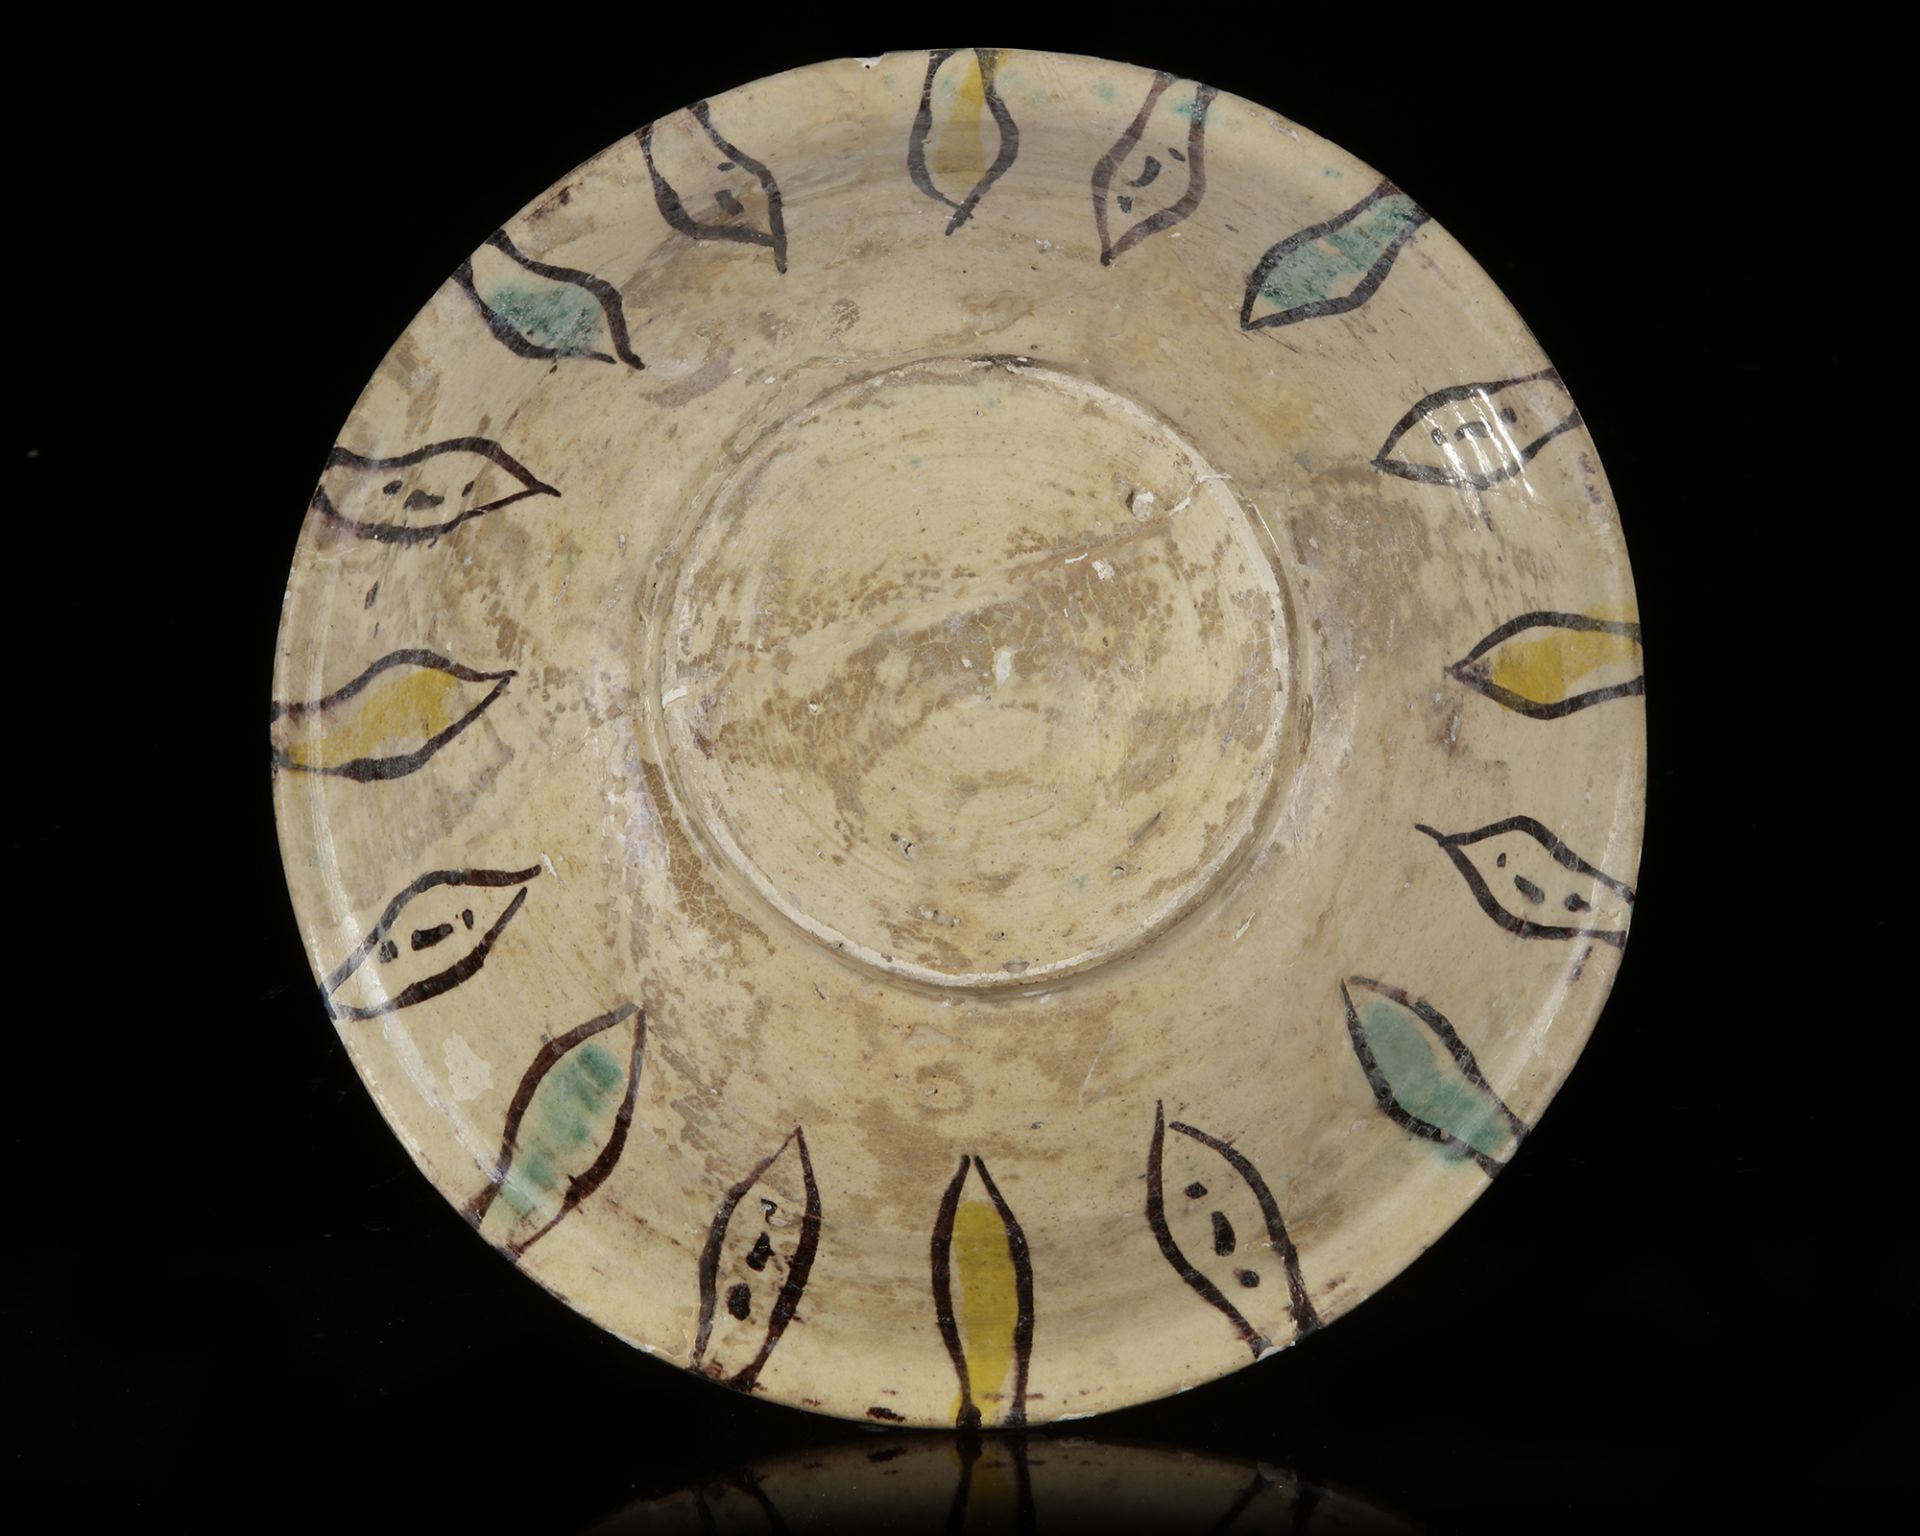 A NISHAPUR POLYCHROME DECORATED BOWL, PERSIA, 10TH CENTURY - Image 4 of 4